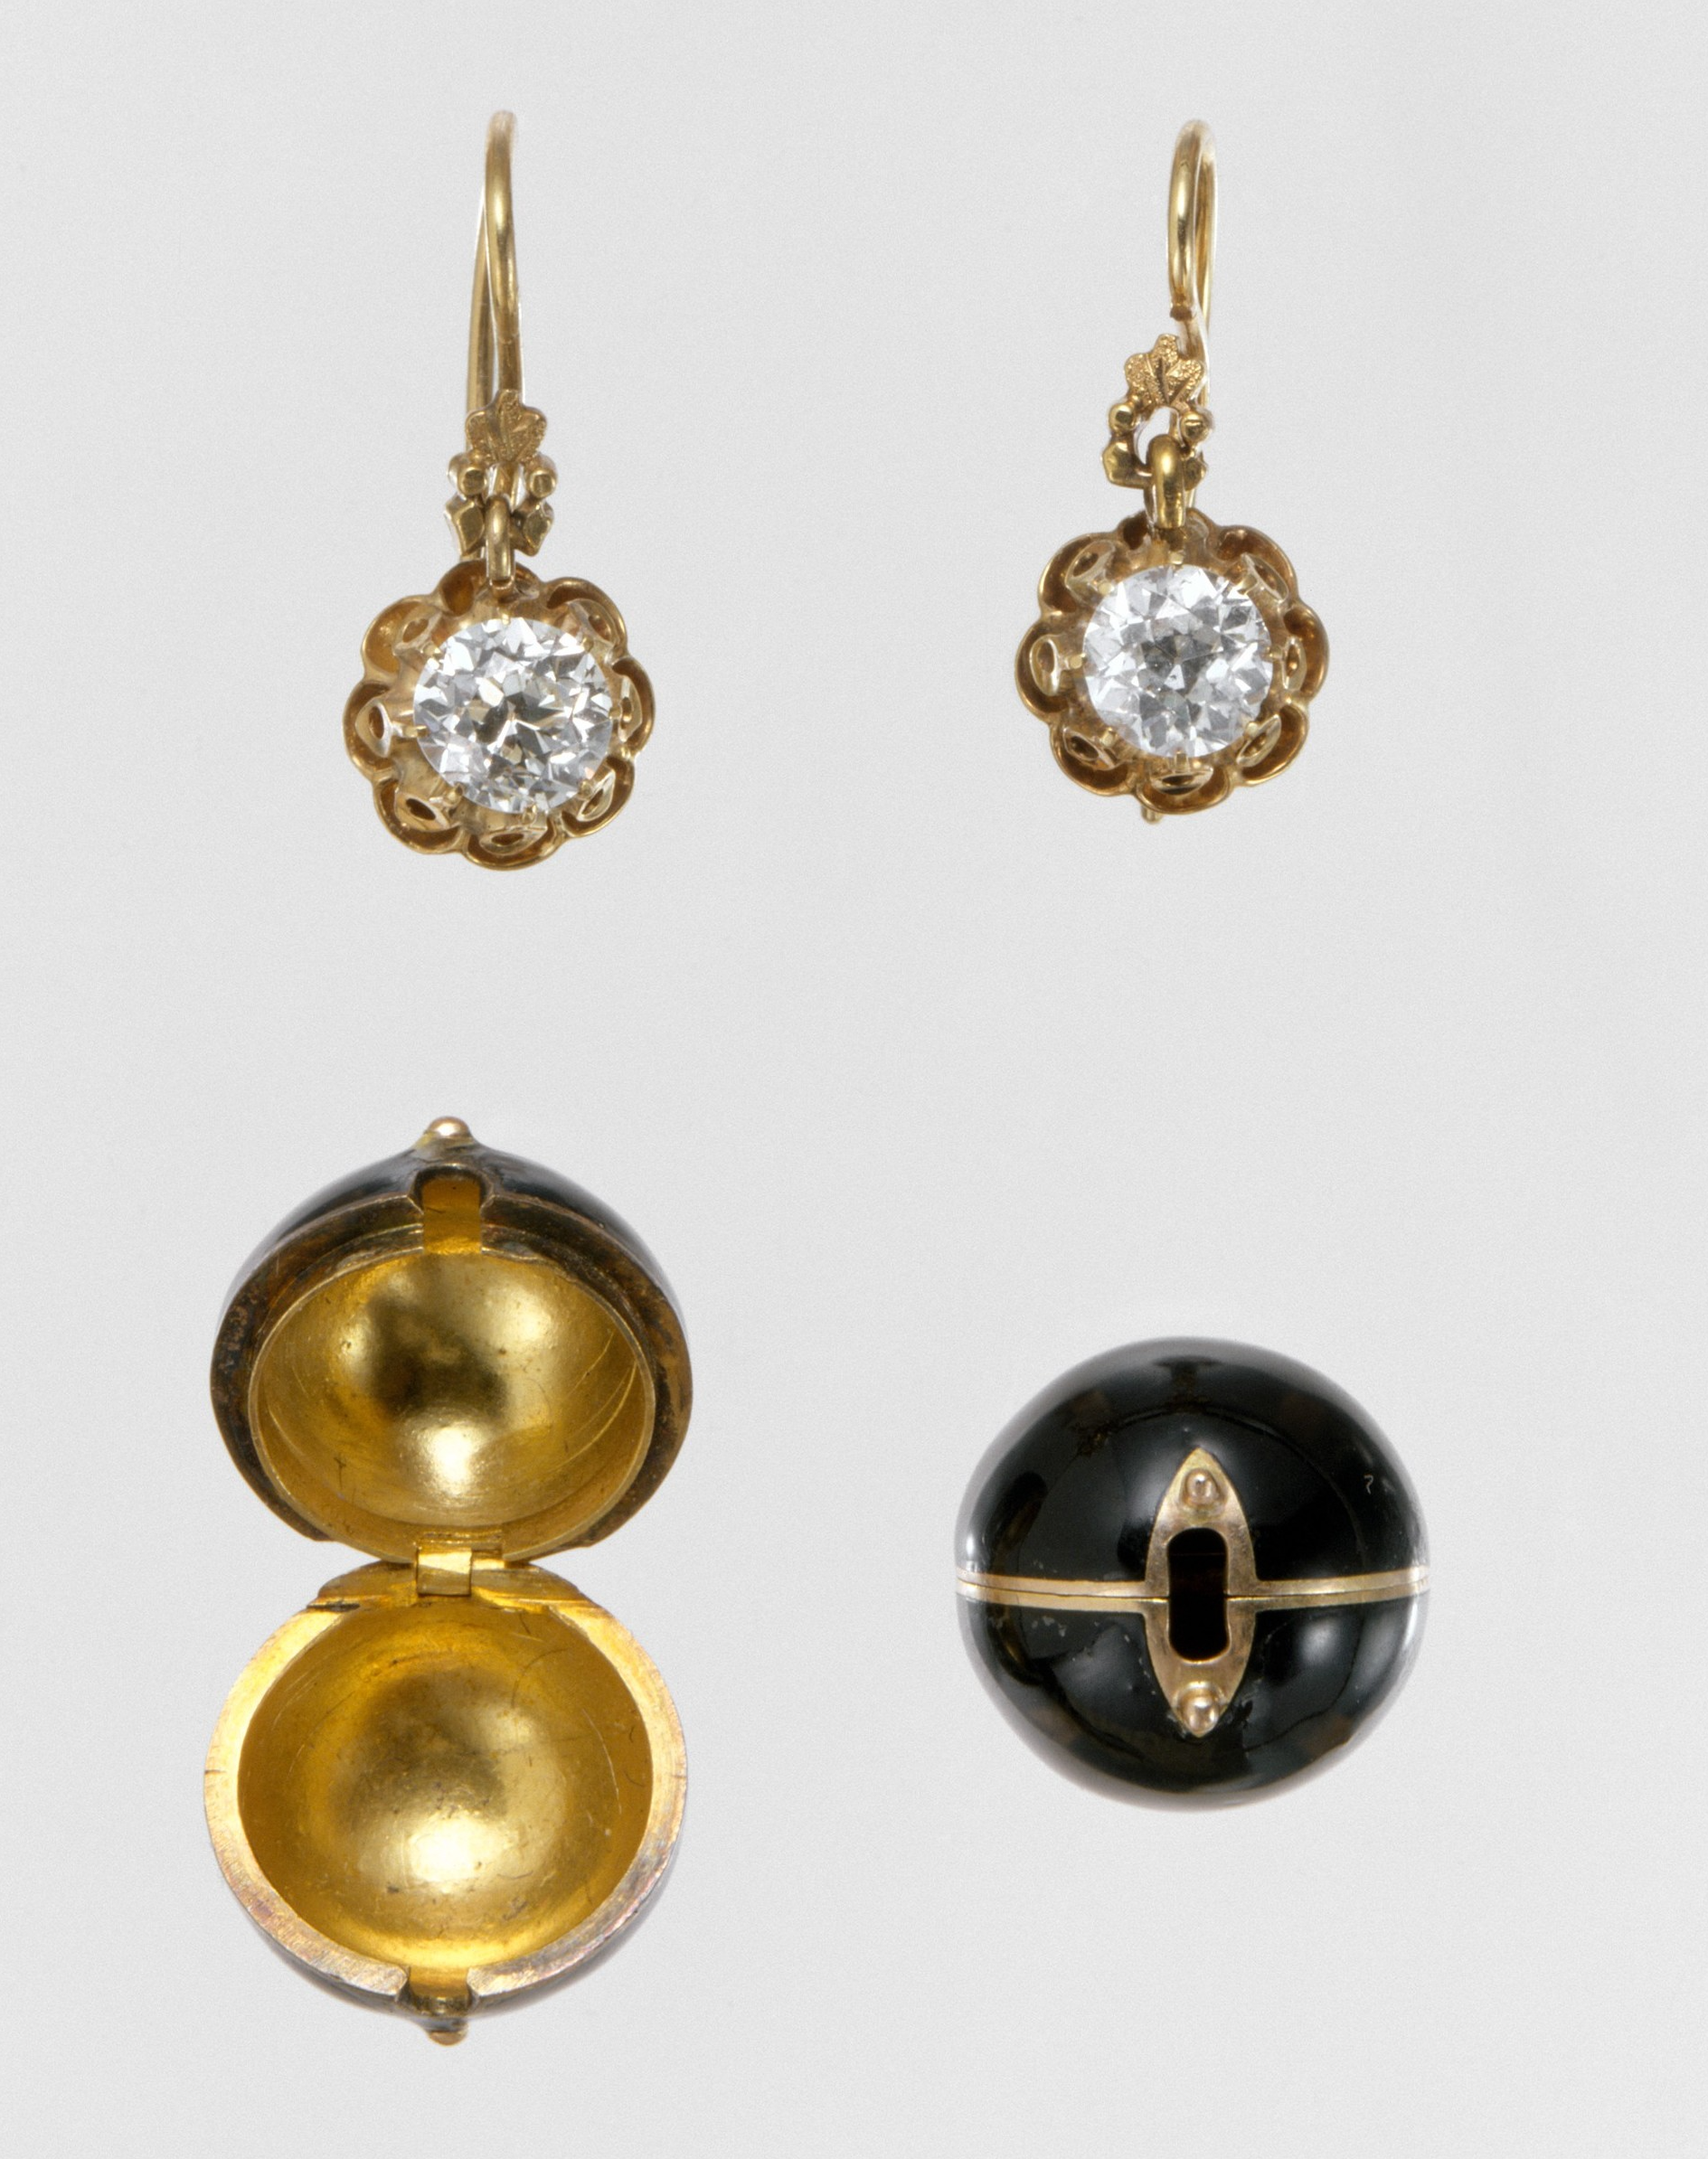 Old Mine cut diamonds with enameled "coach covers," ca. 1882-85. The Metropolitan Museum of Art.